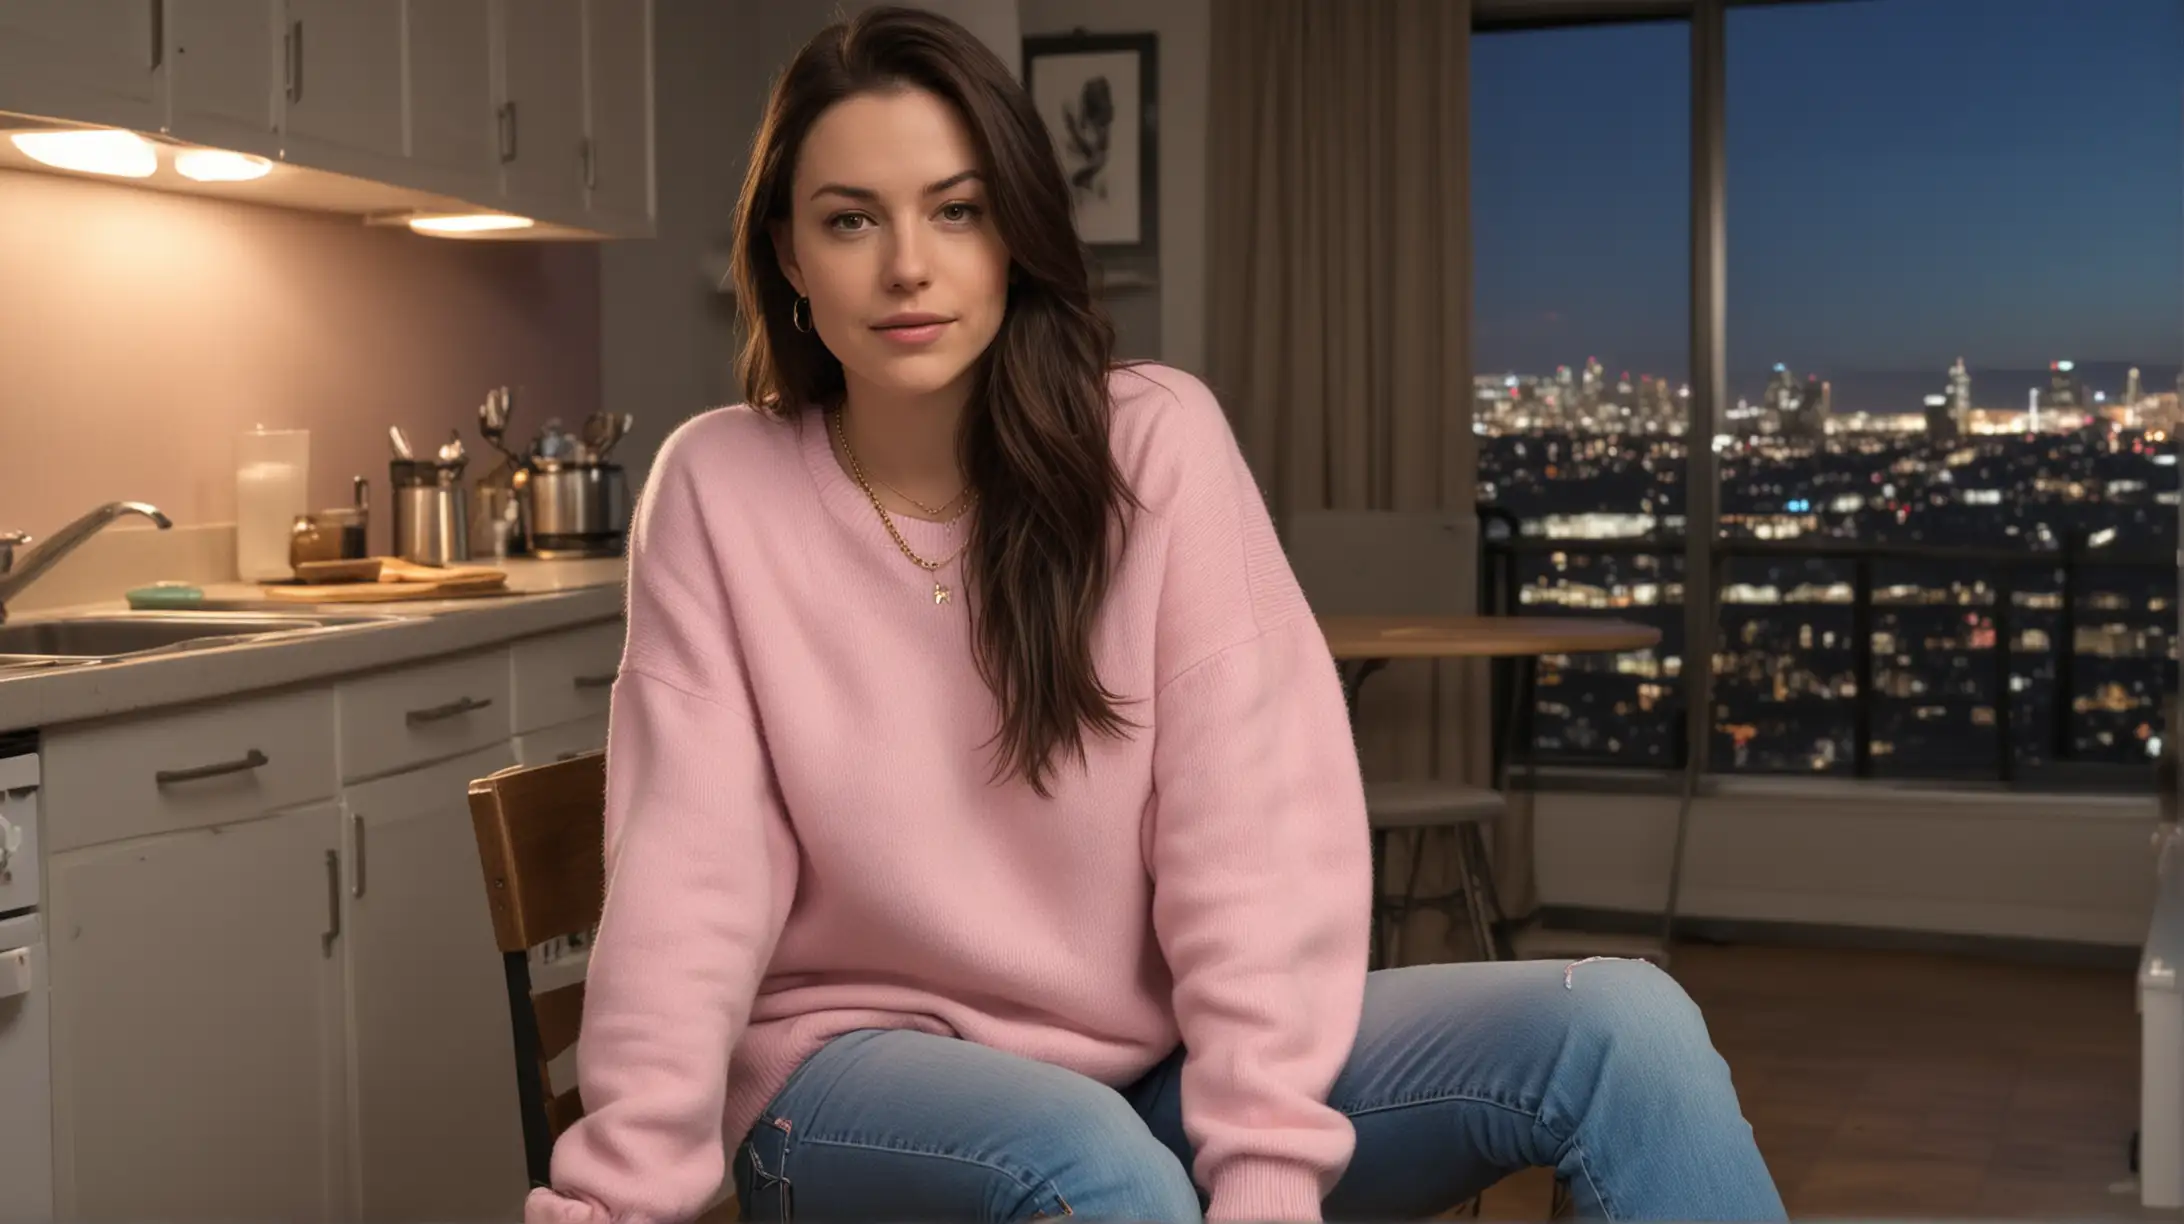 In a small dim kitchen at night, 33 year old pale white woman with long dark brown hair parted to the right sitting on a chair, wearing a pink sweater, blue jeans, gold necklace, Chuck Taylor sneakers. Night urban dense high rise background.